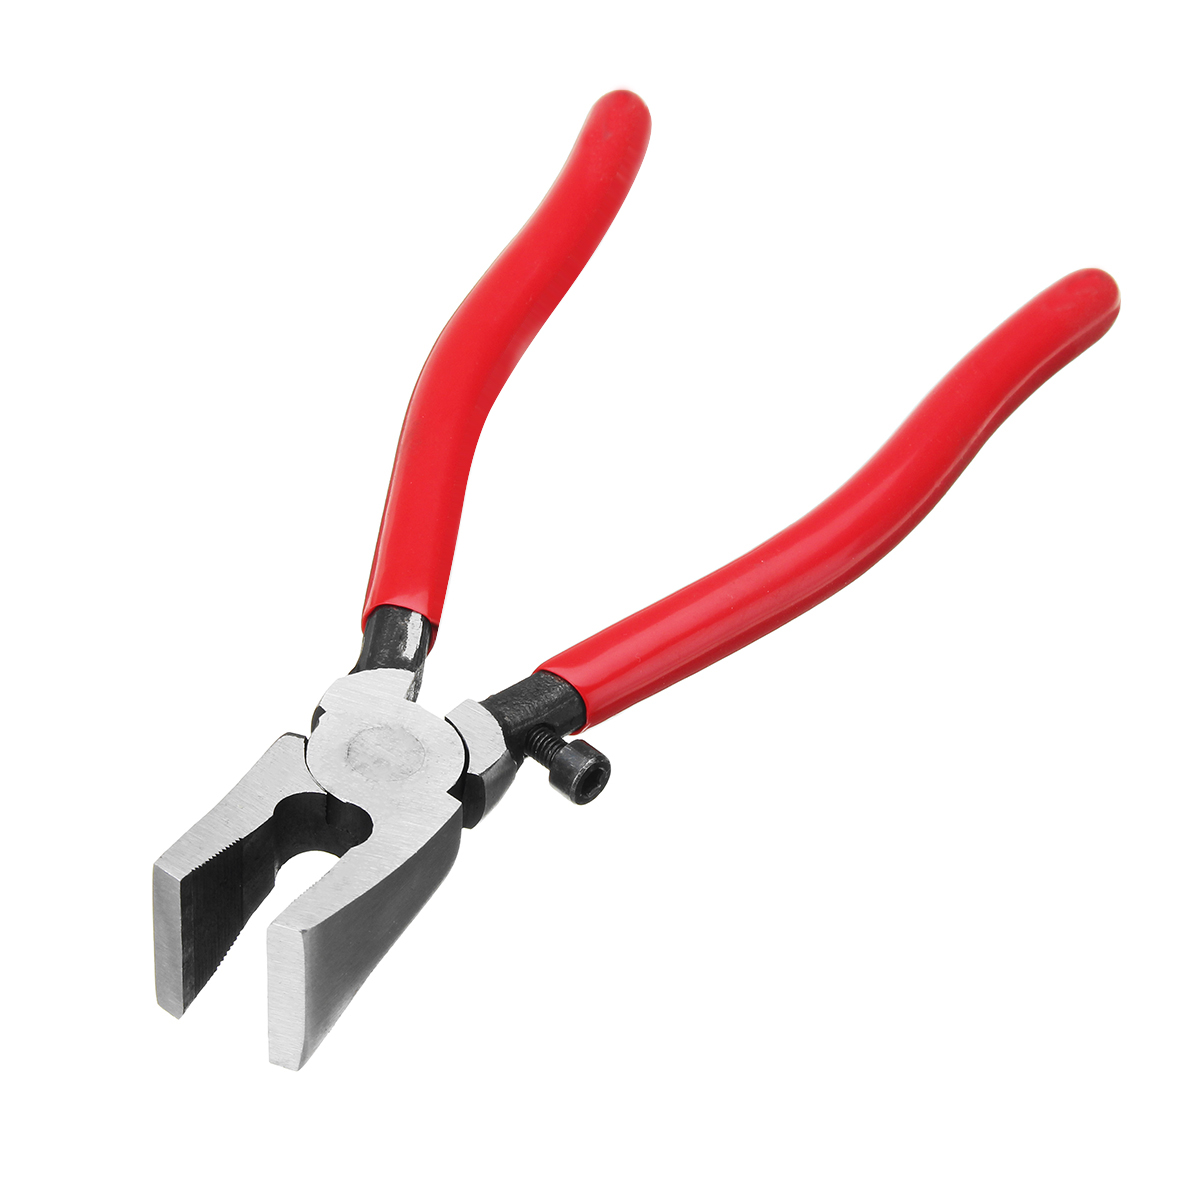 Stained-Glass-Tool-Kit-Running-Pliers-Breaking-Grozing-Pliers-Grip-Cutter-Non-slip-Handle-1334030-6